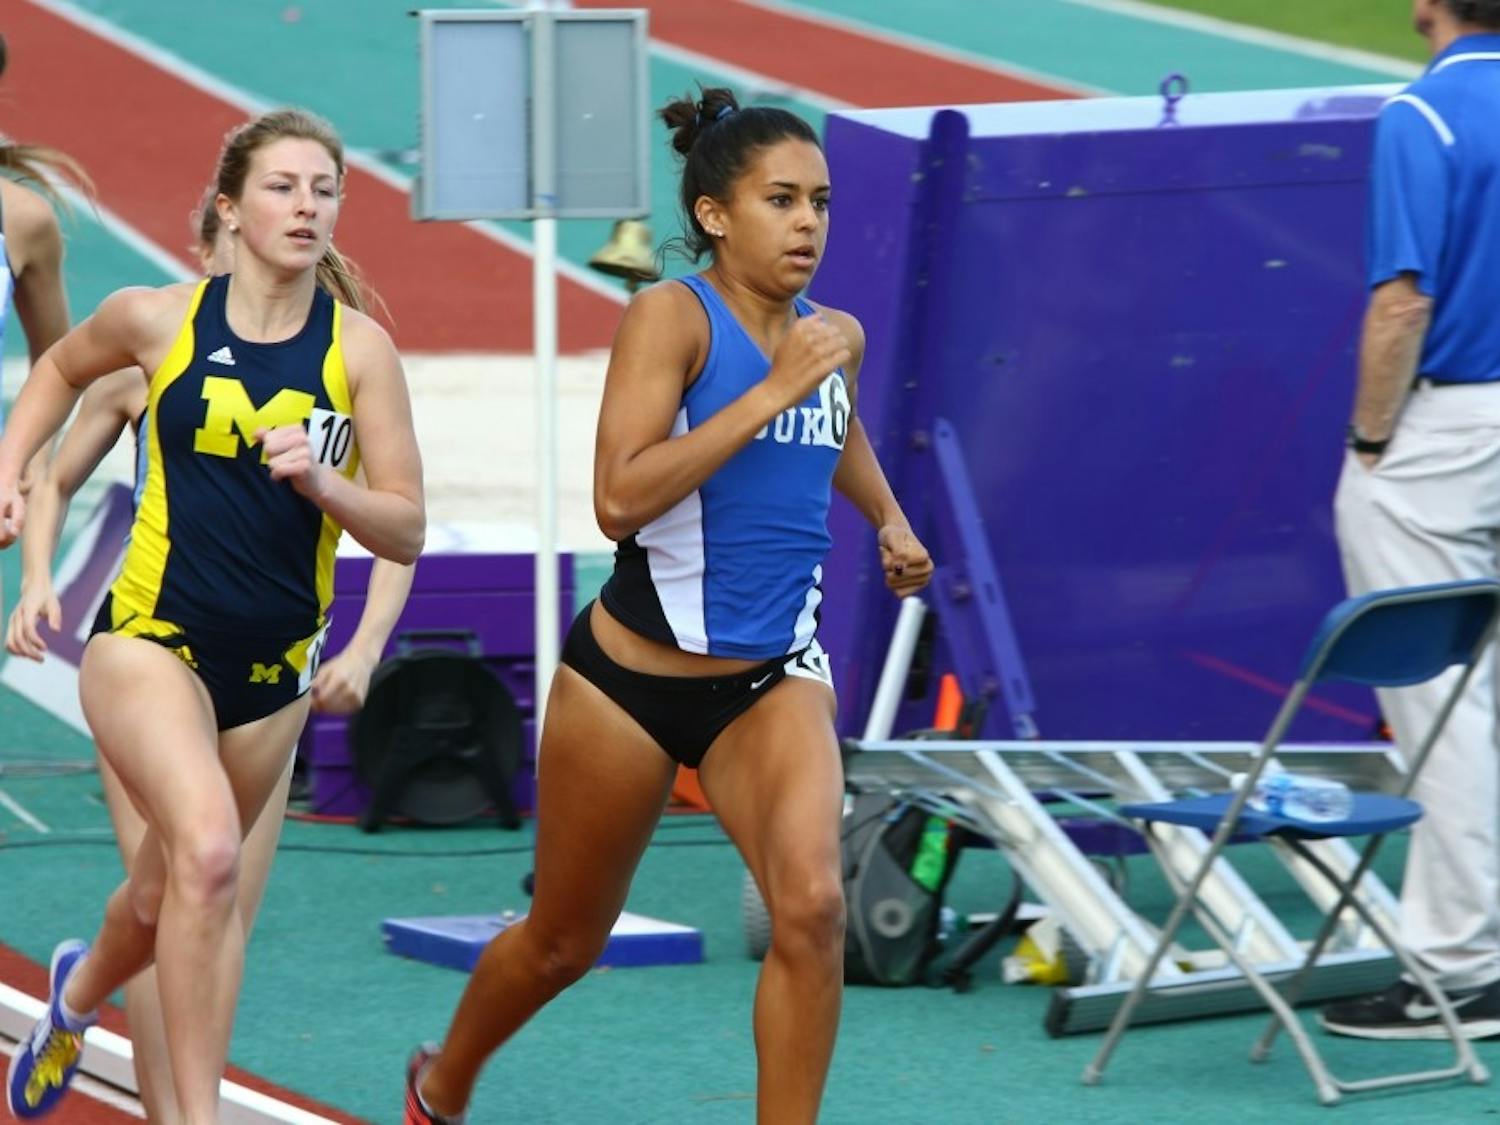 Anima Banks finished sixth in the 800 meters&nbsp;with her third-fastest time in the event.